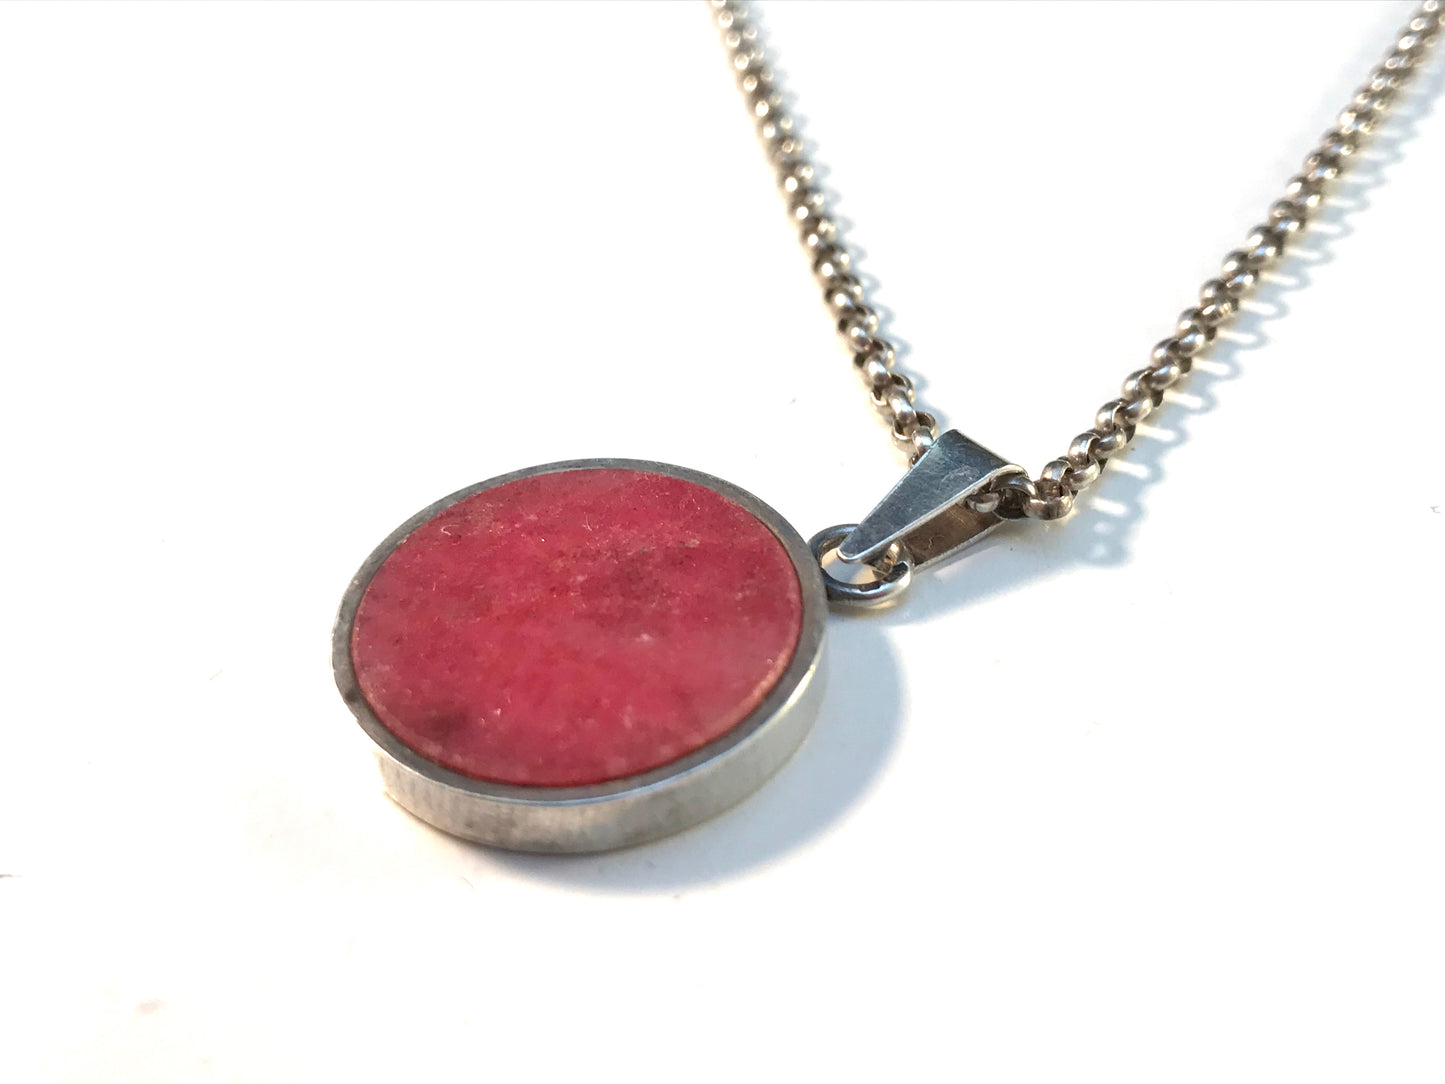 Bronsil, Sweden 1970s Solid 830 Silver Norwegian Thulite Pendant Necklace